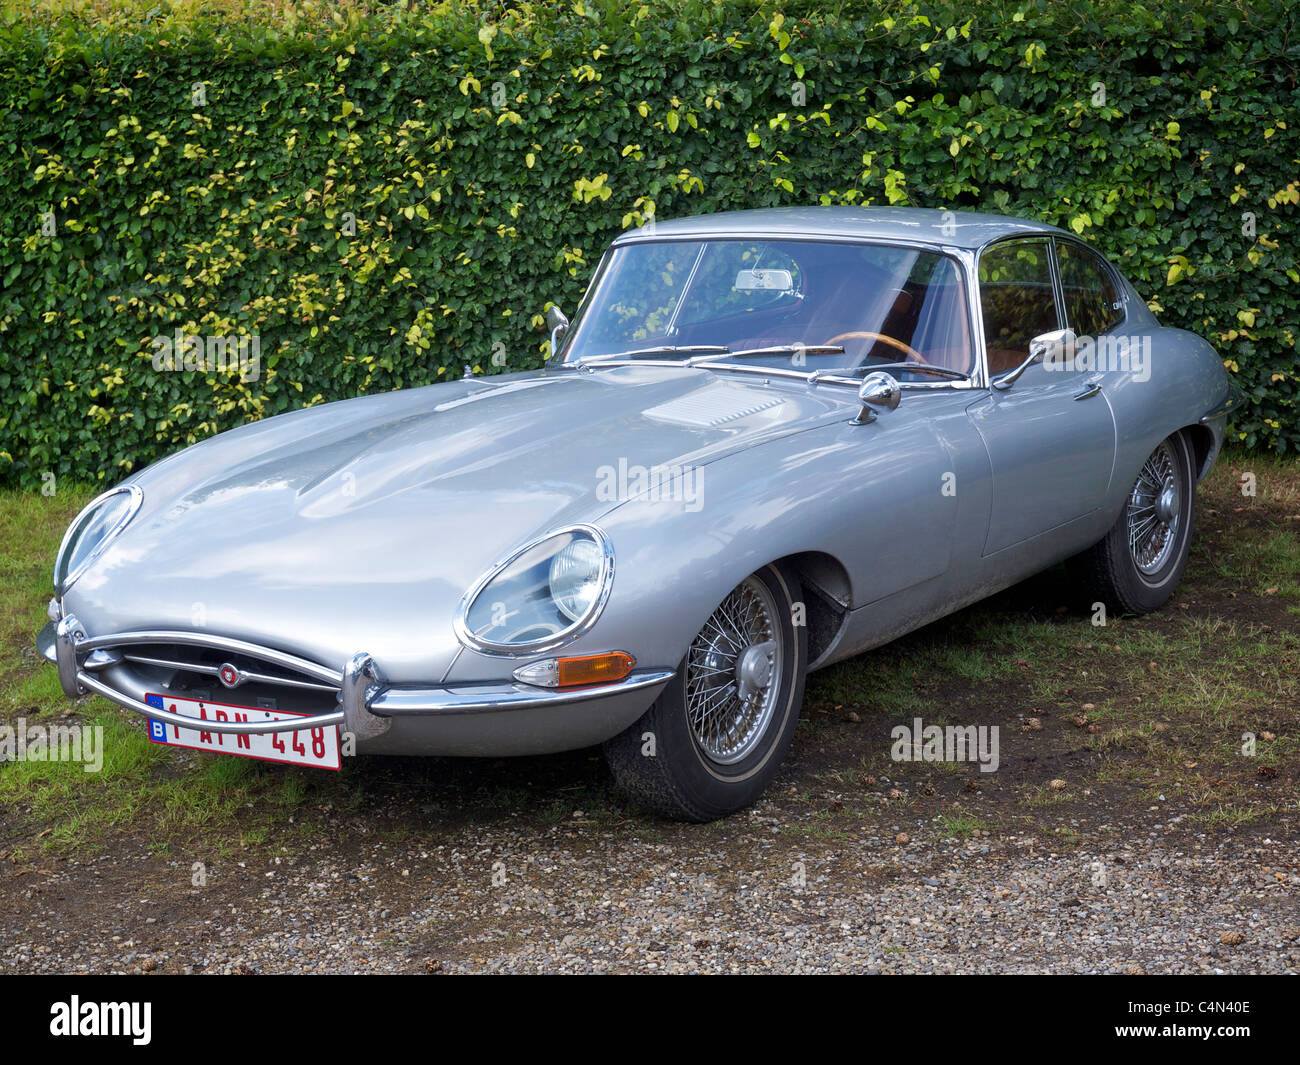 Silver Jaguar E-type 2+2 coupe sportscar with wire wheels Stock Photo